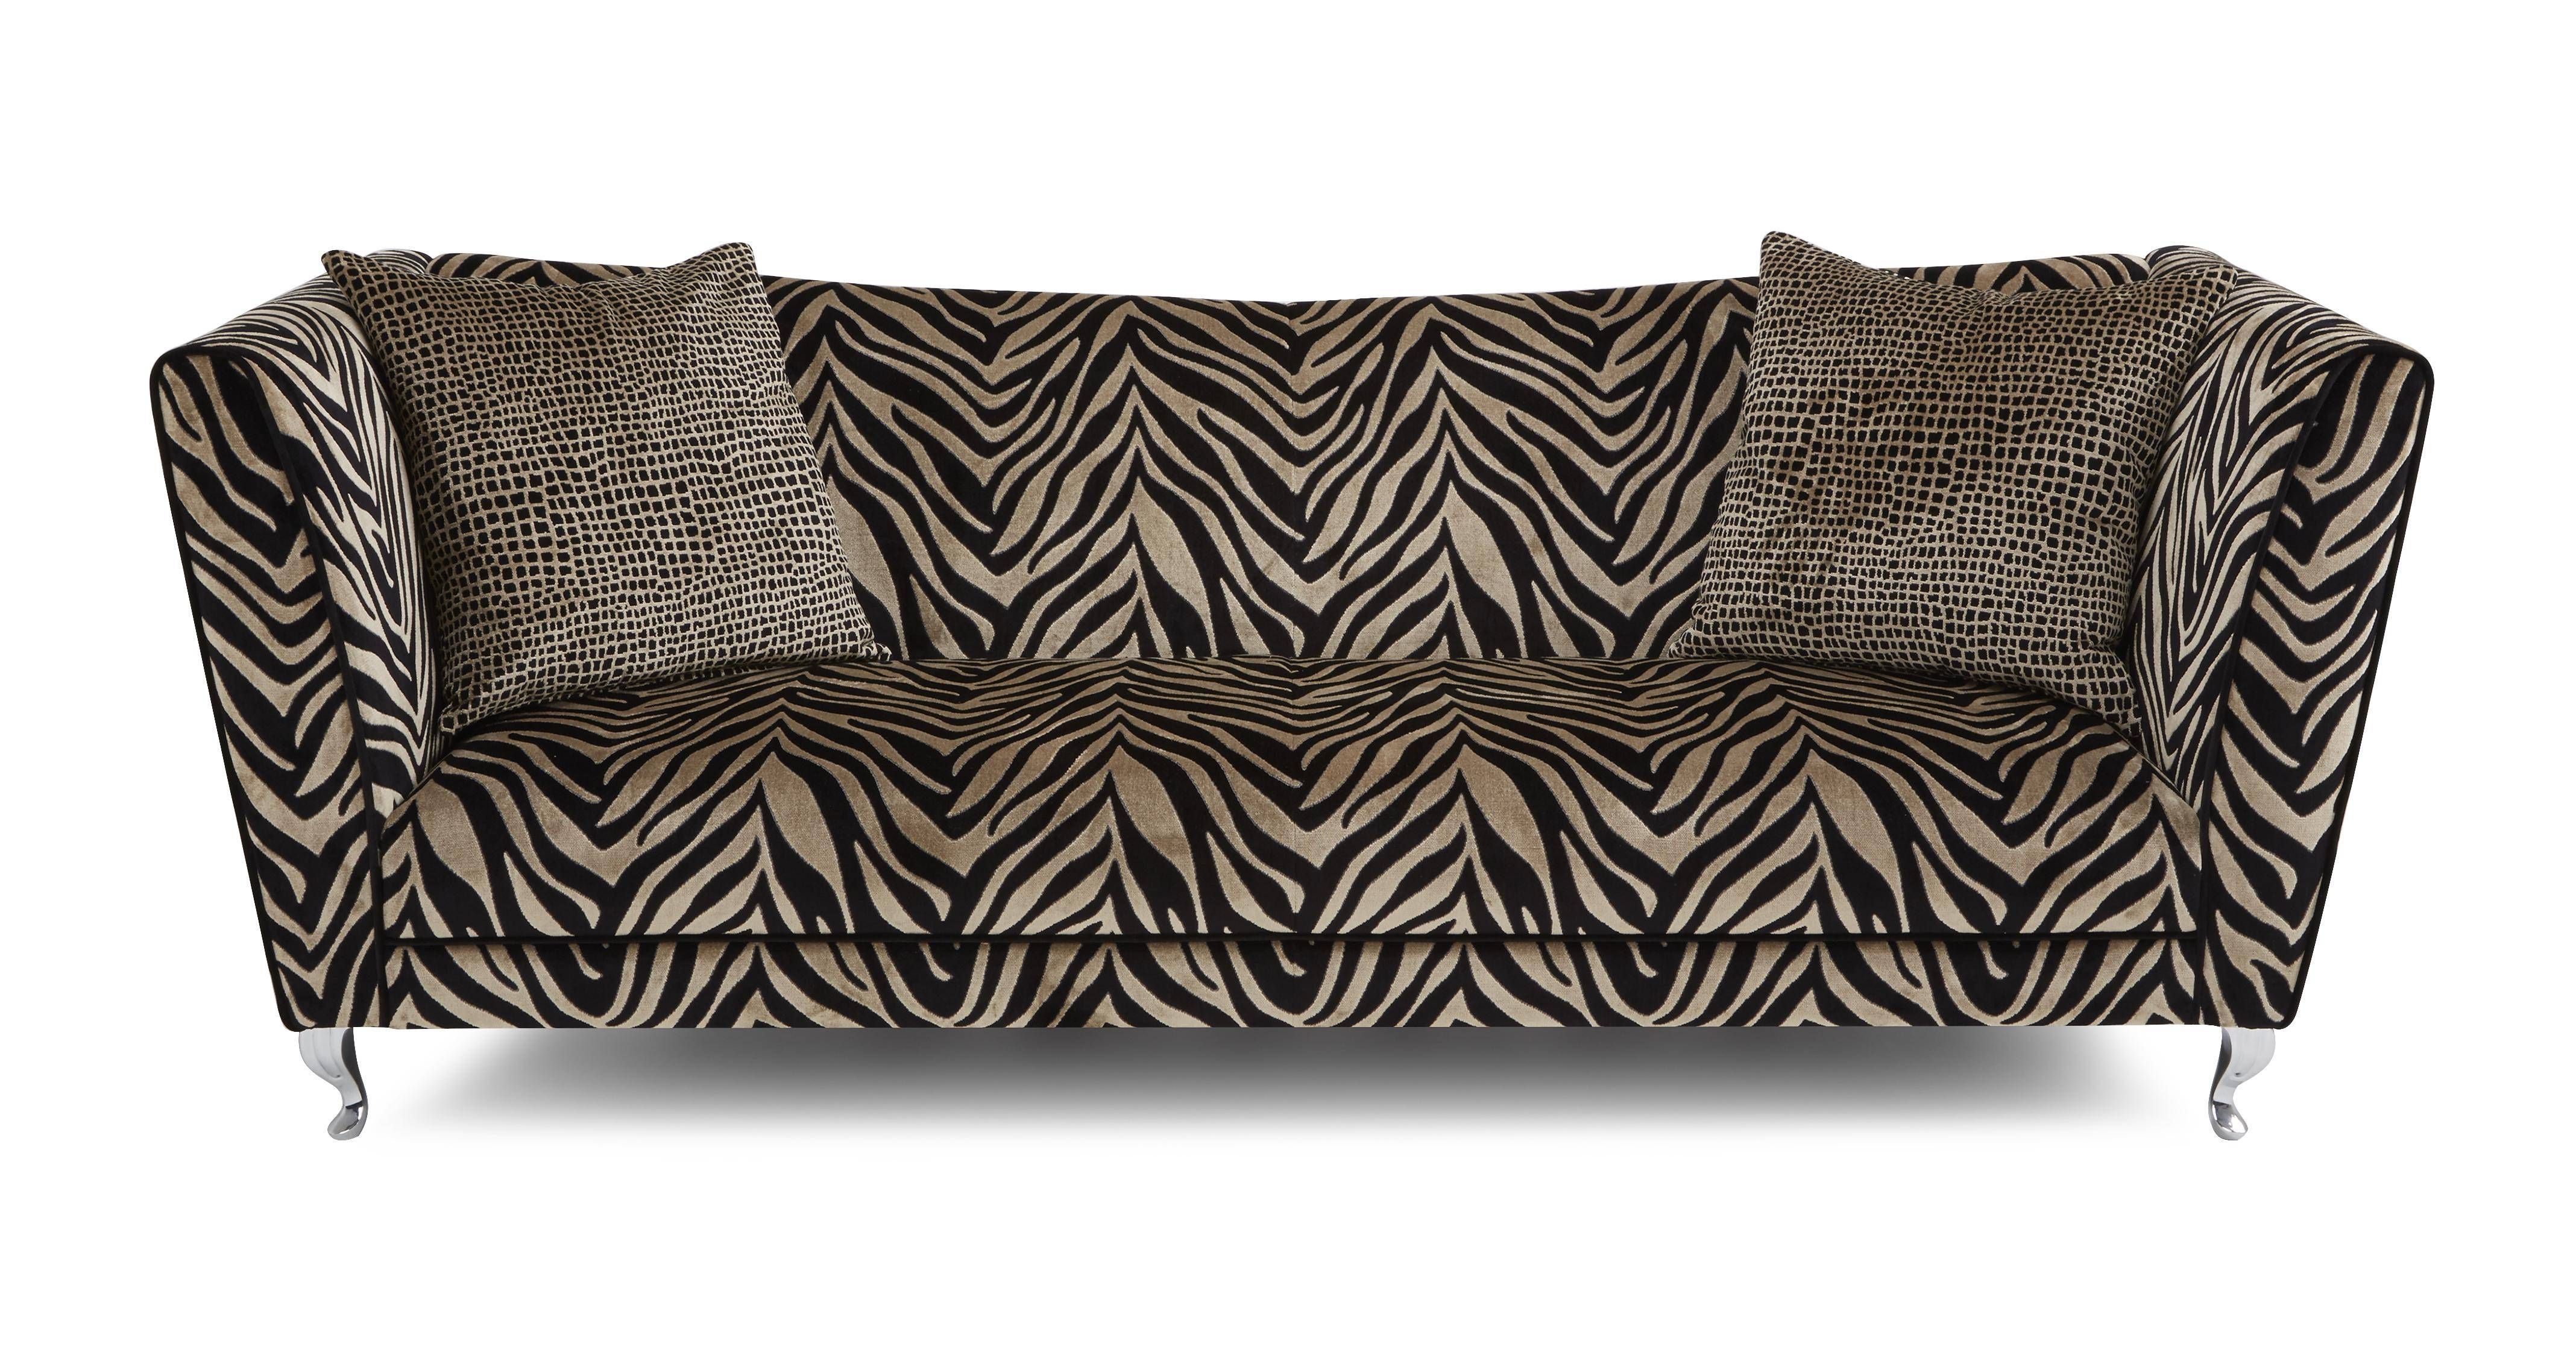 More about leopard print sofas uk, Latest Post: Animal Print Sofas